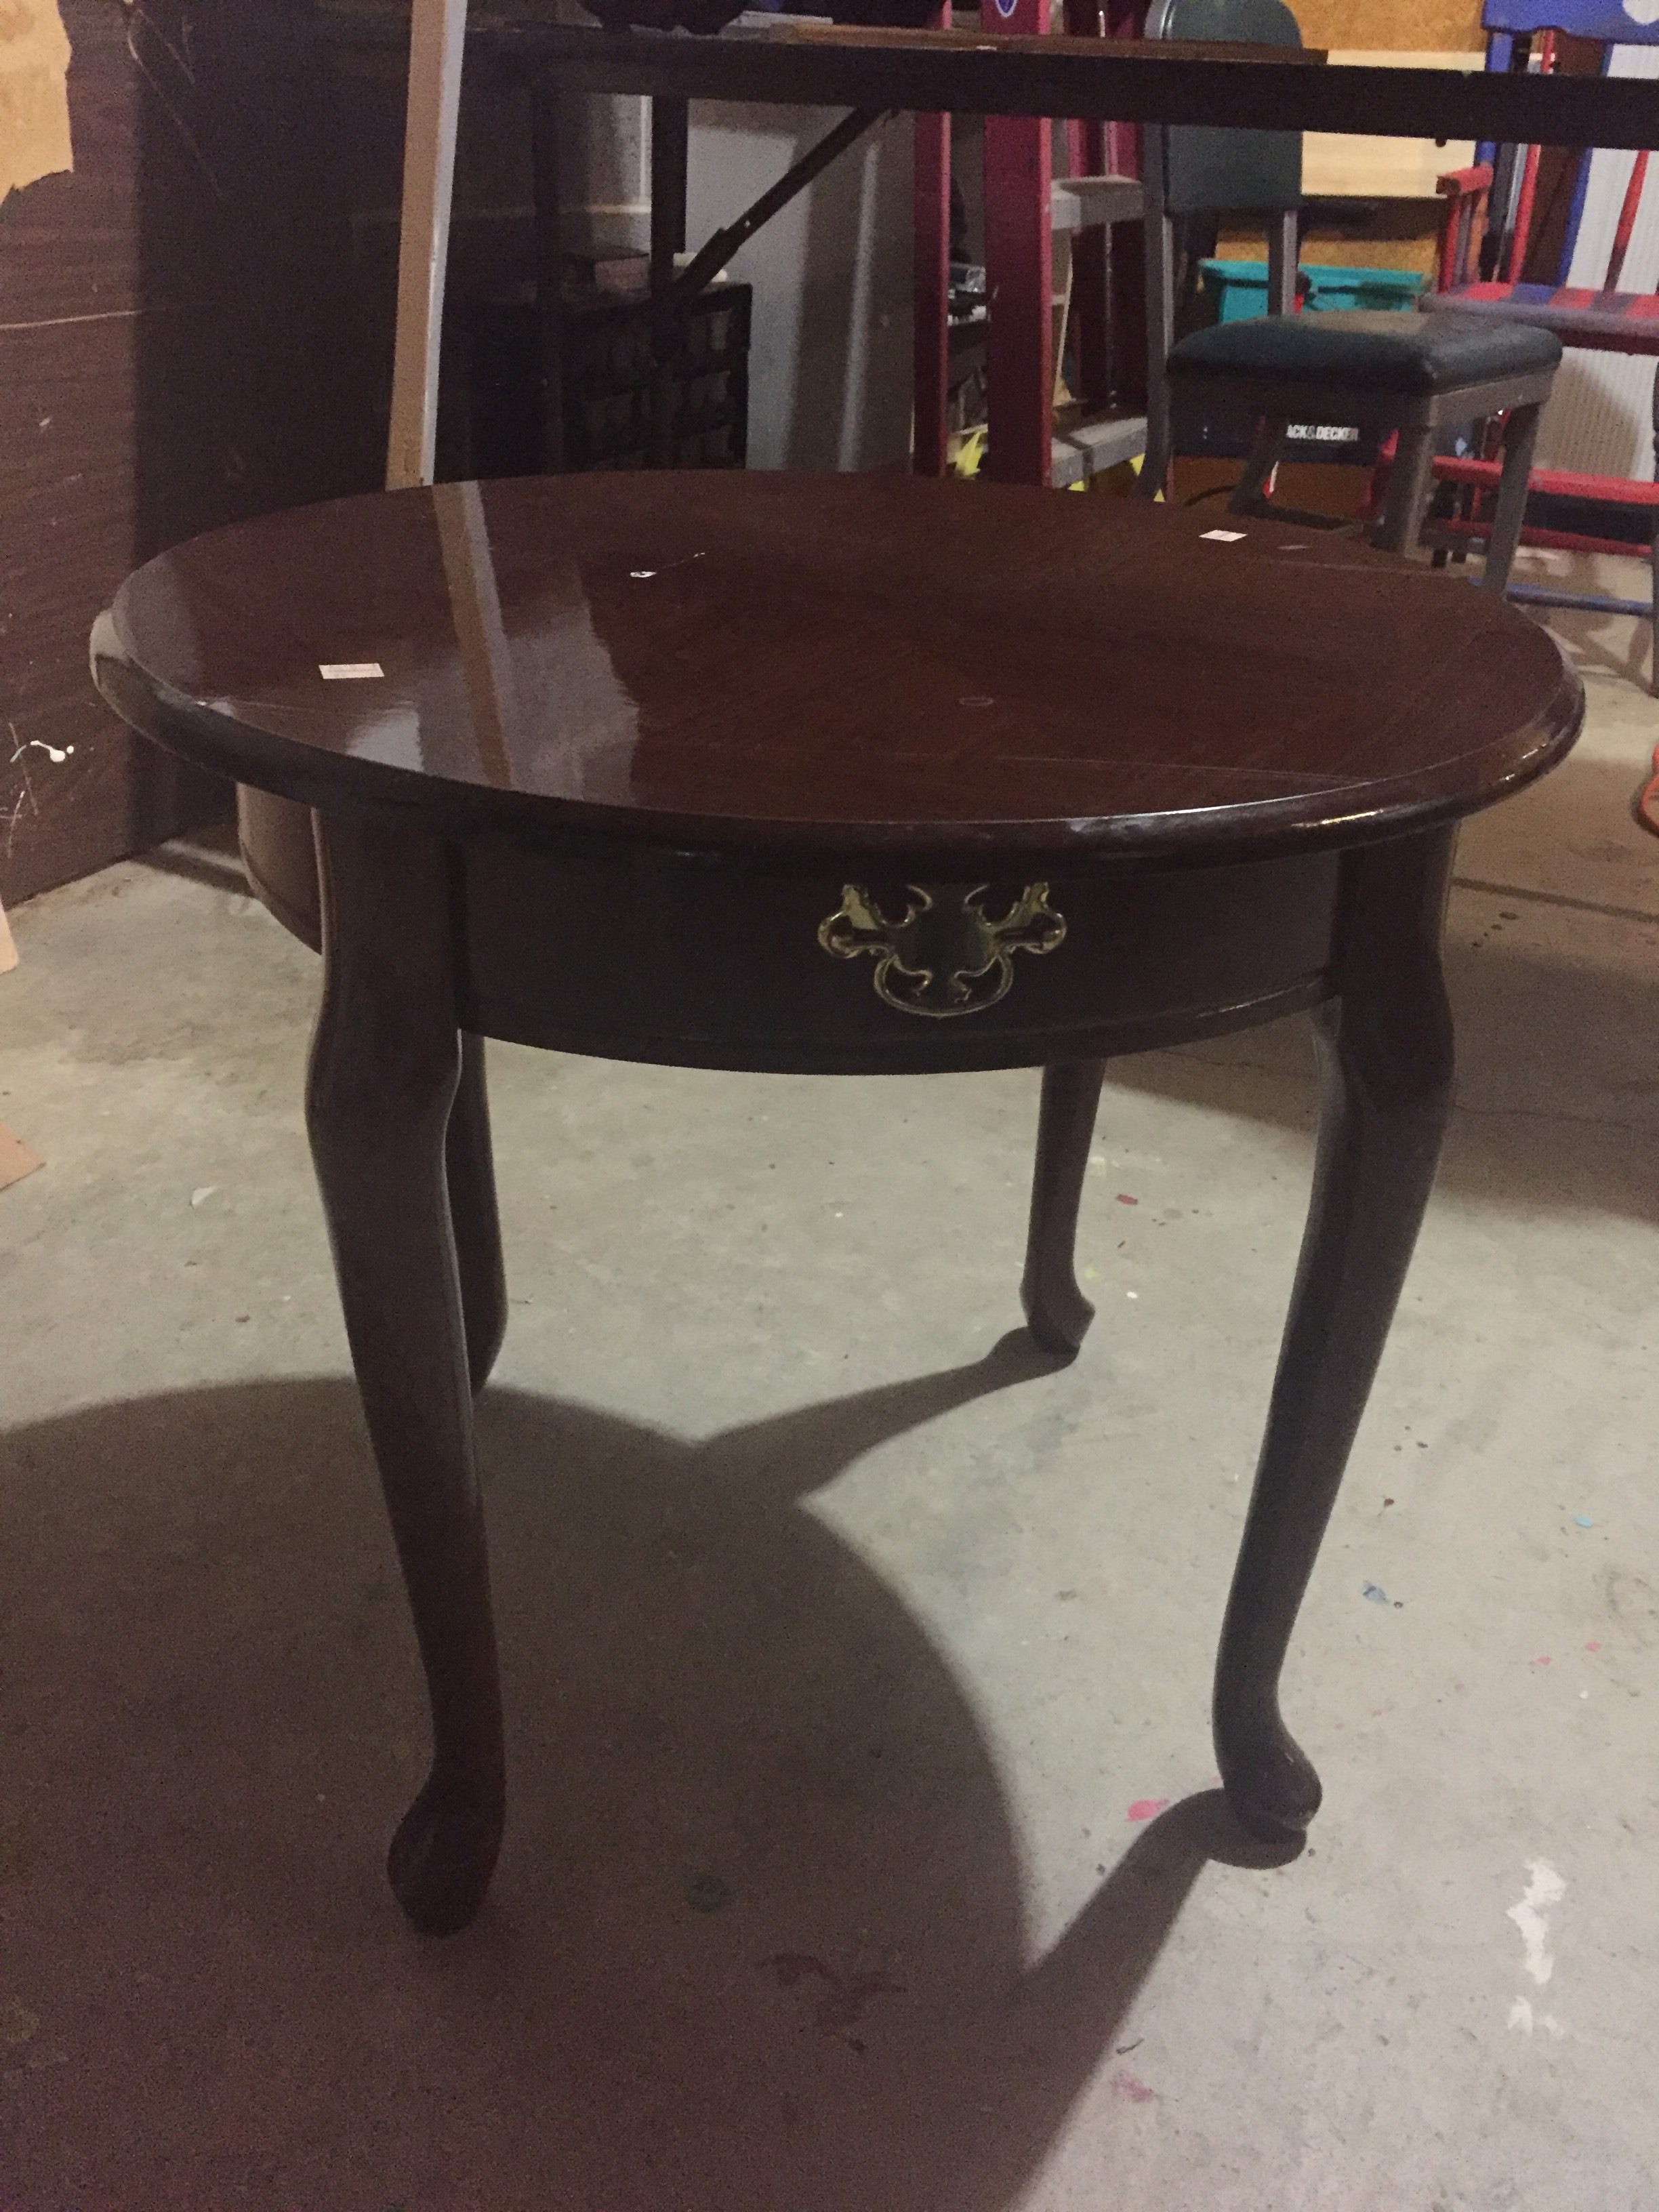 Courtney's little round table before transformation